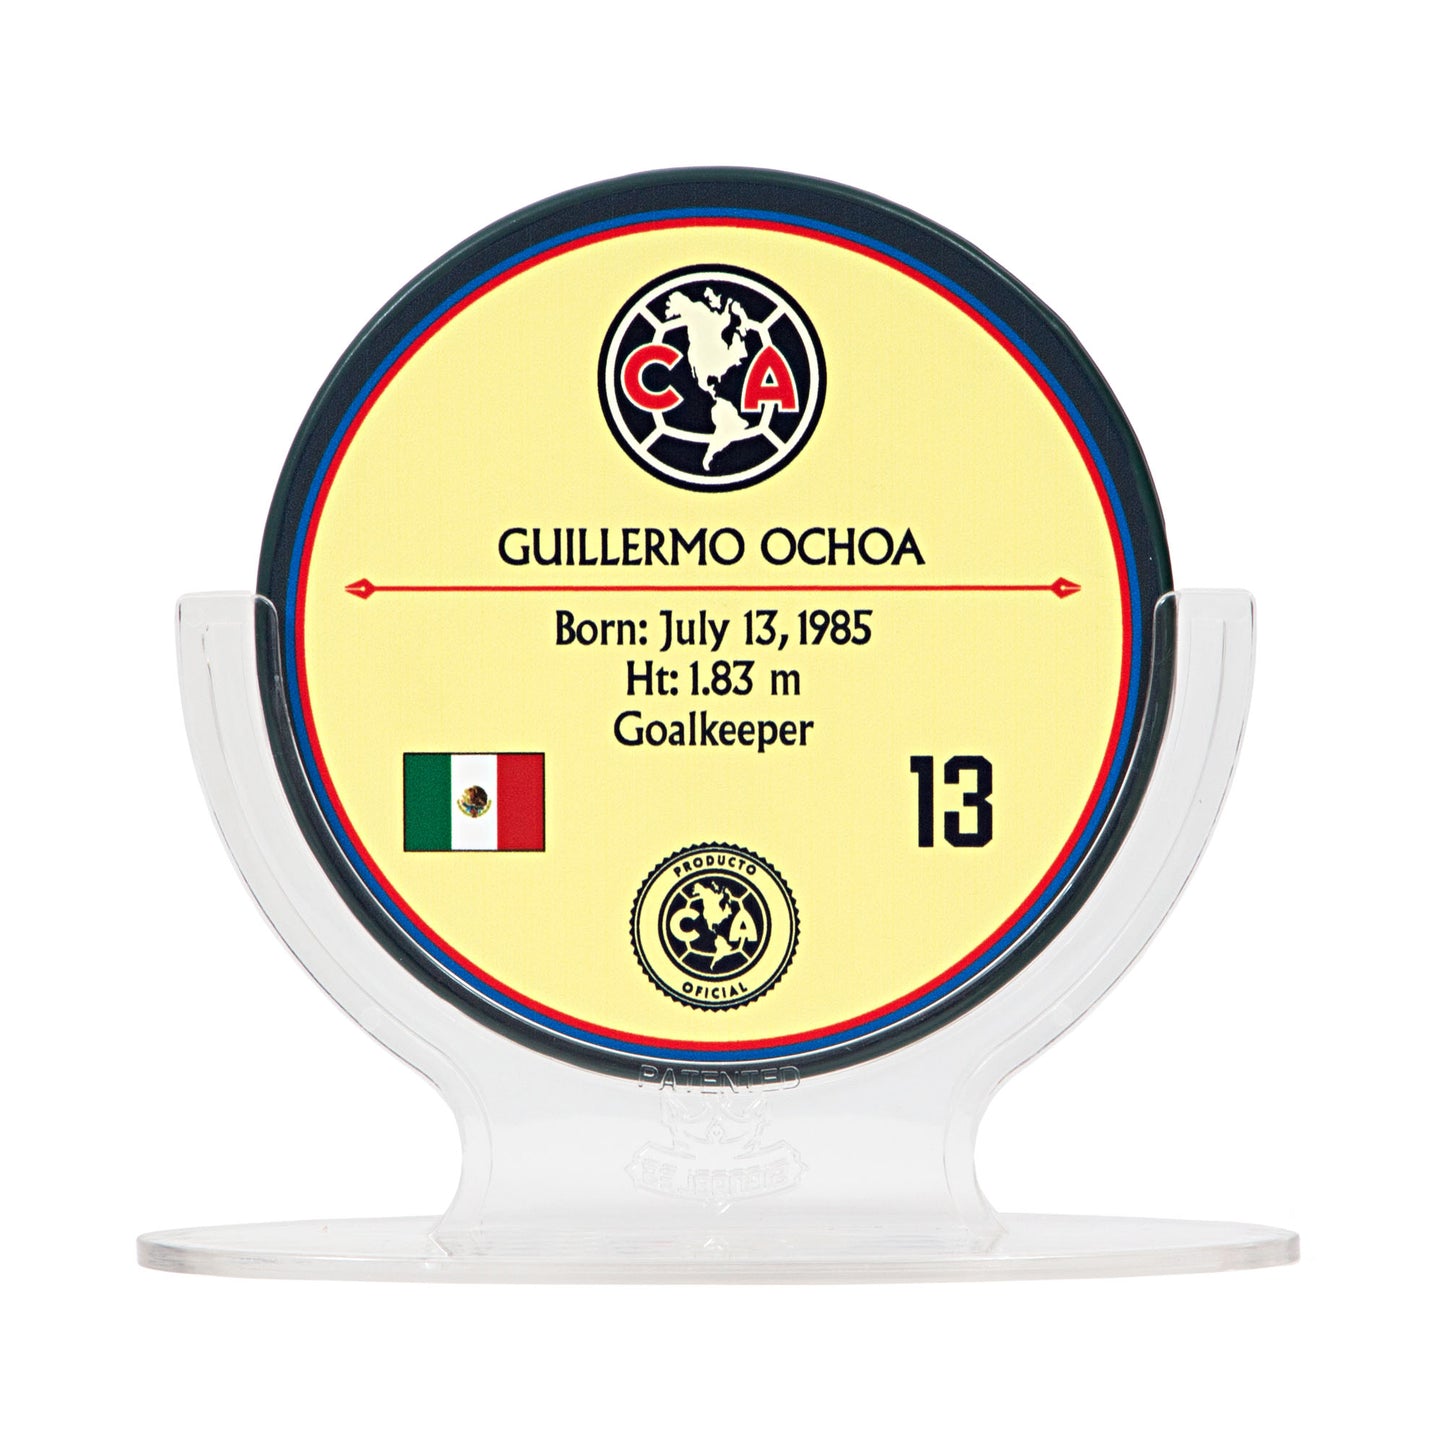 Guillermo Ochoa - Club America Signables Collectible for the biggest Mexico soccer fans